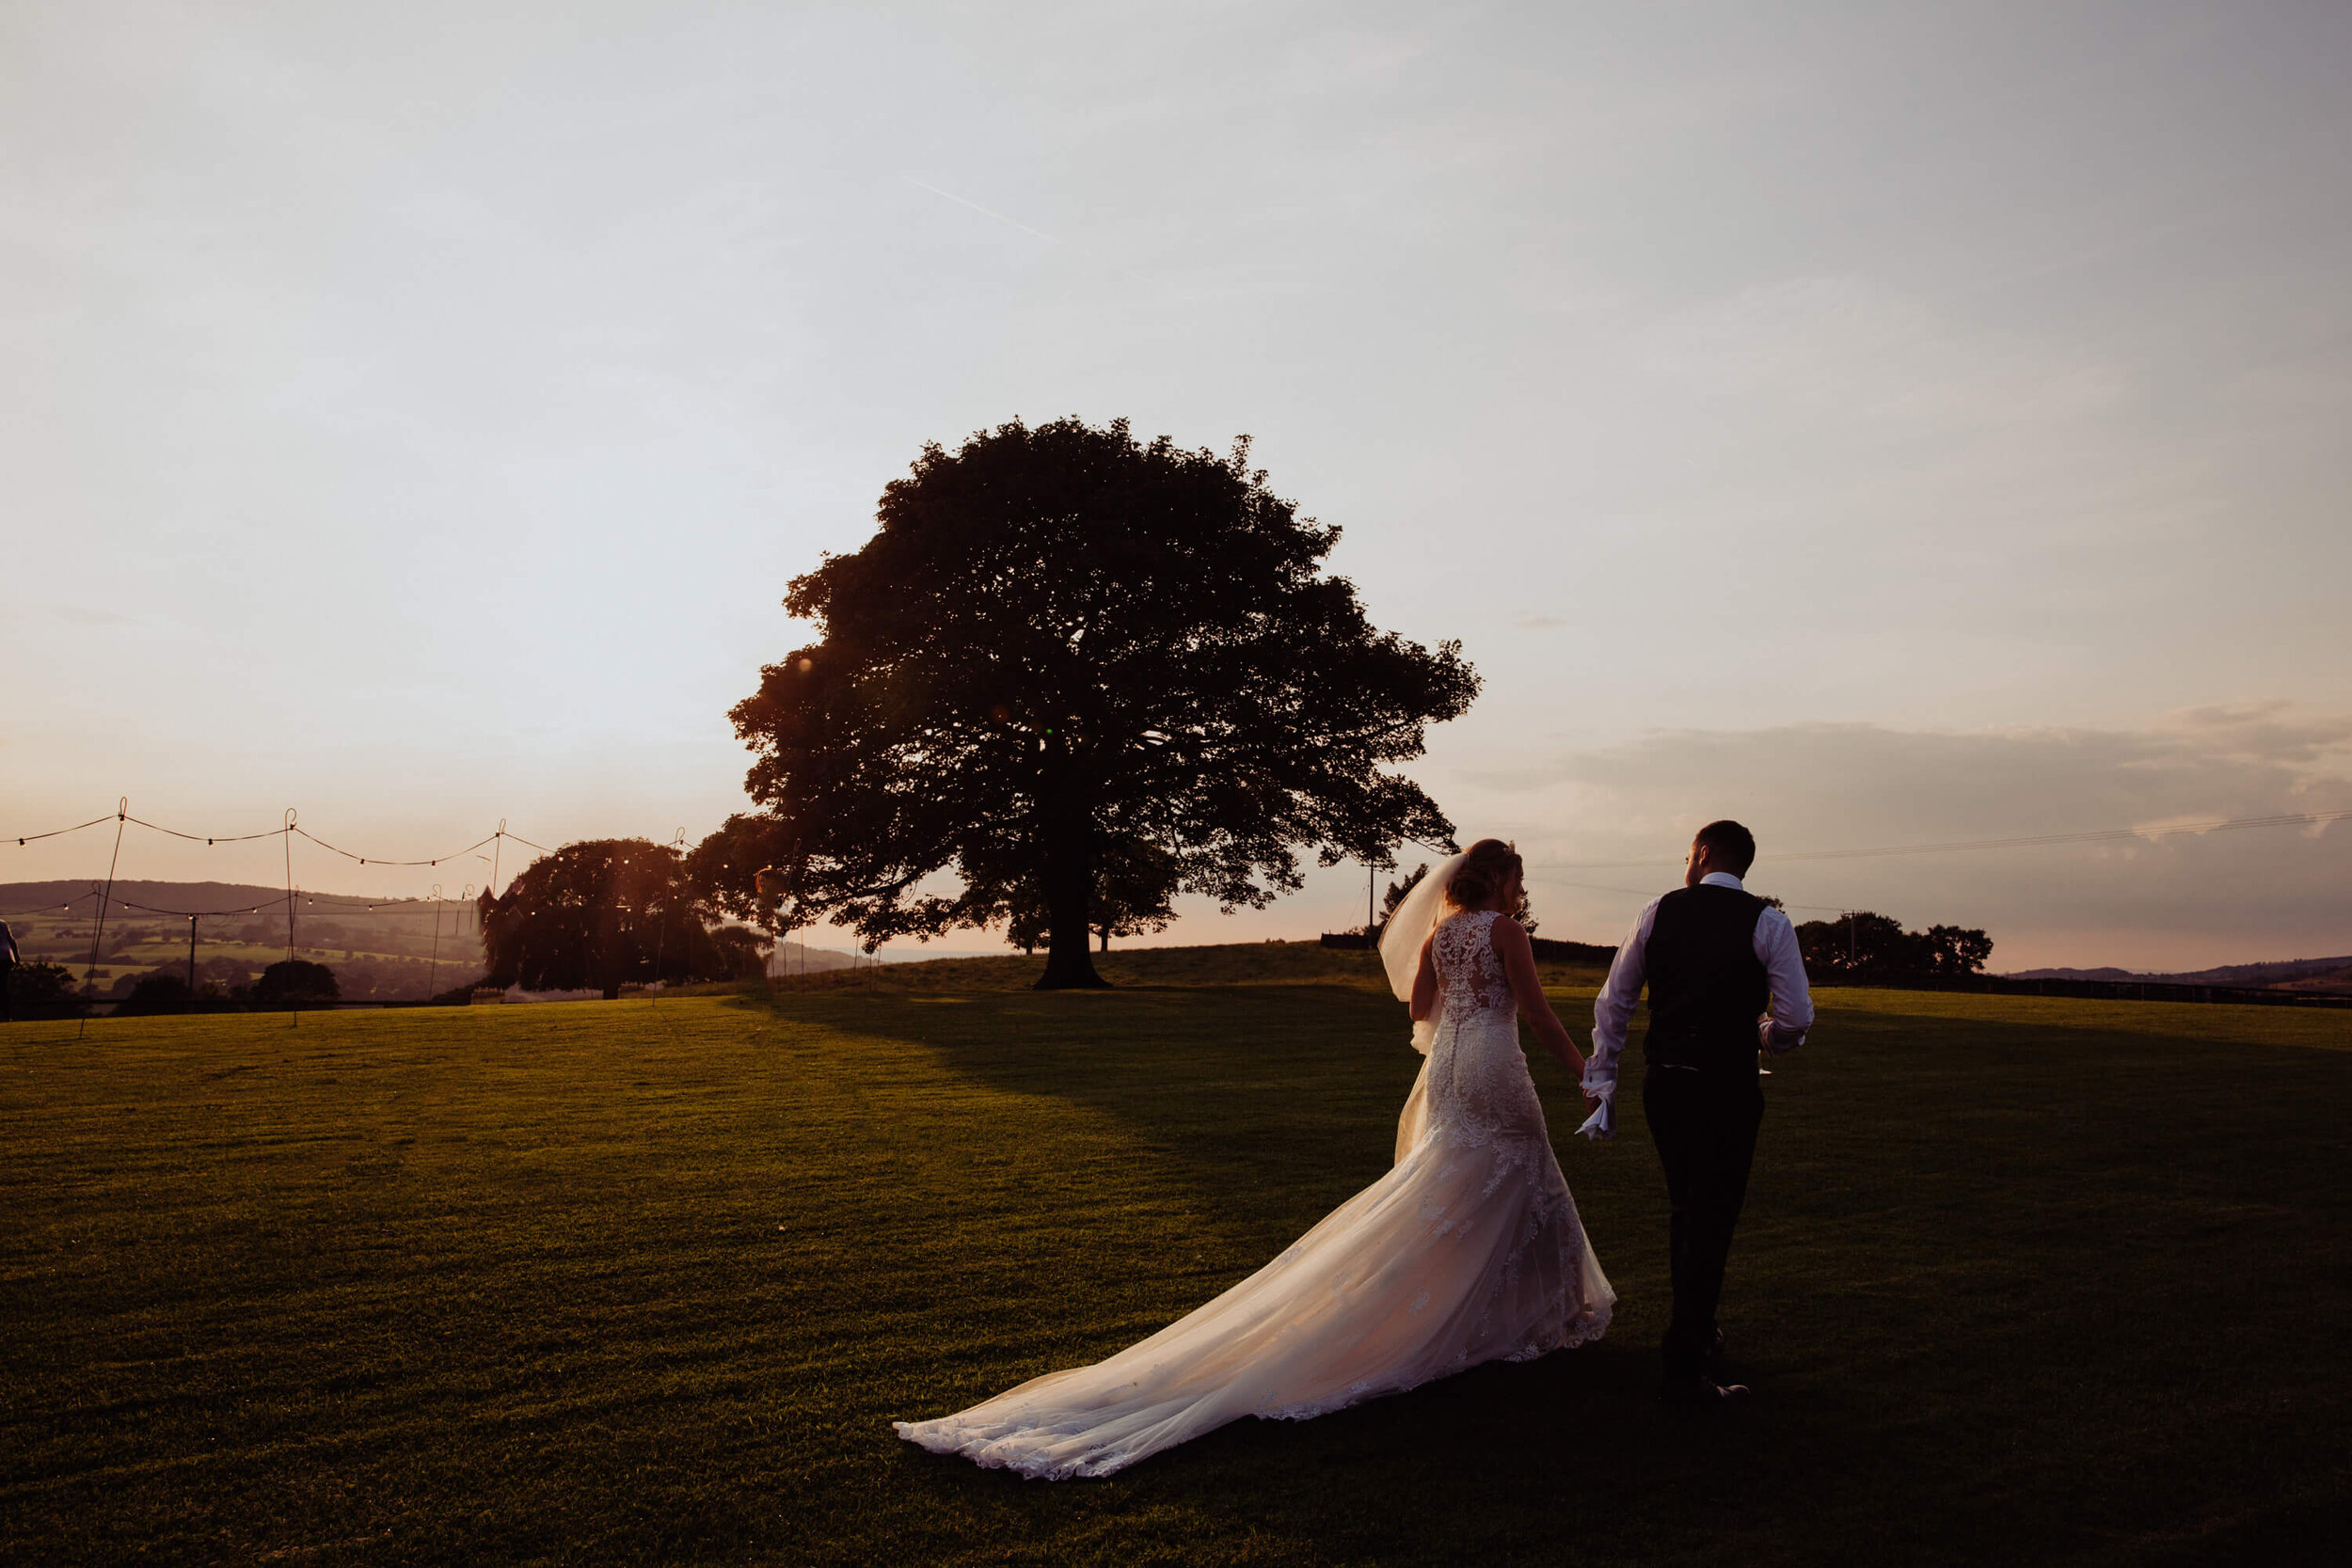 low exposure portrait of bride and groom walking together at sunset